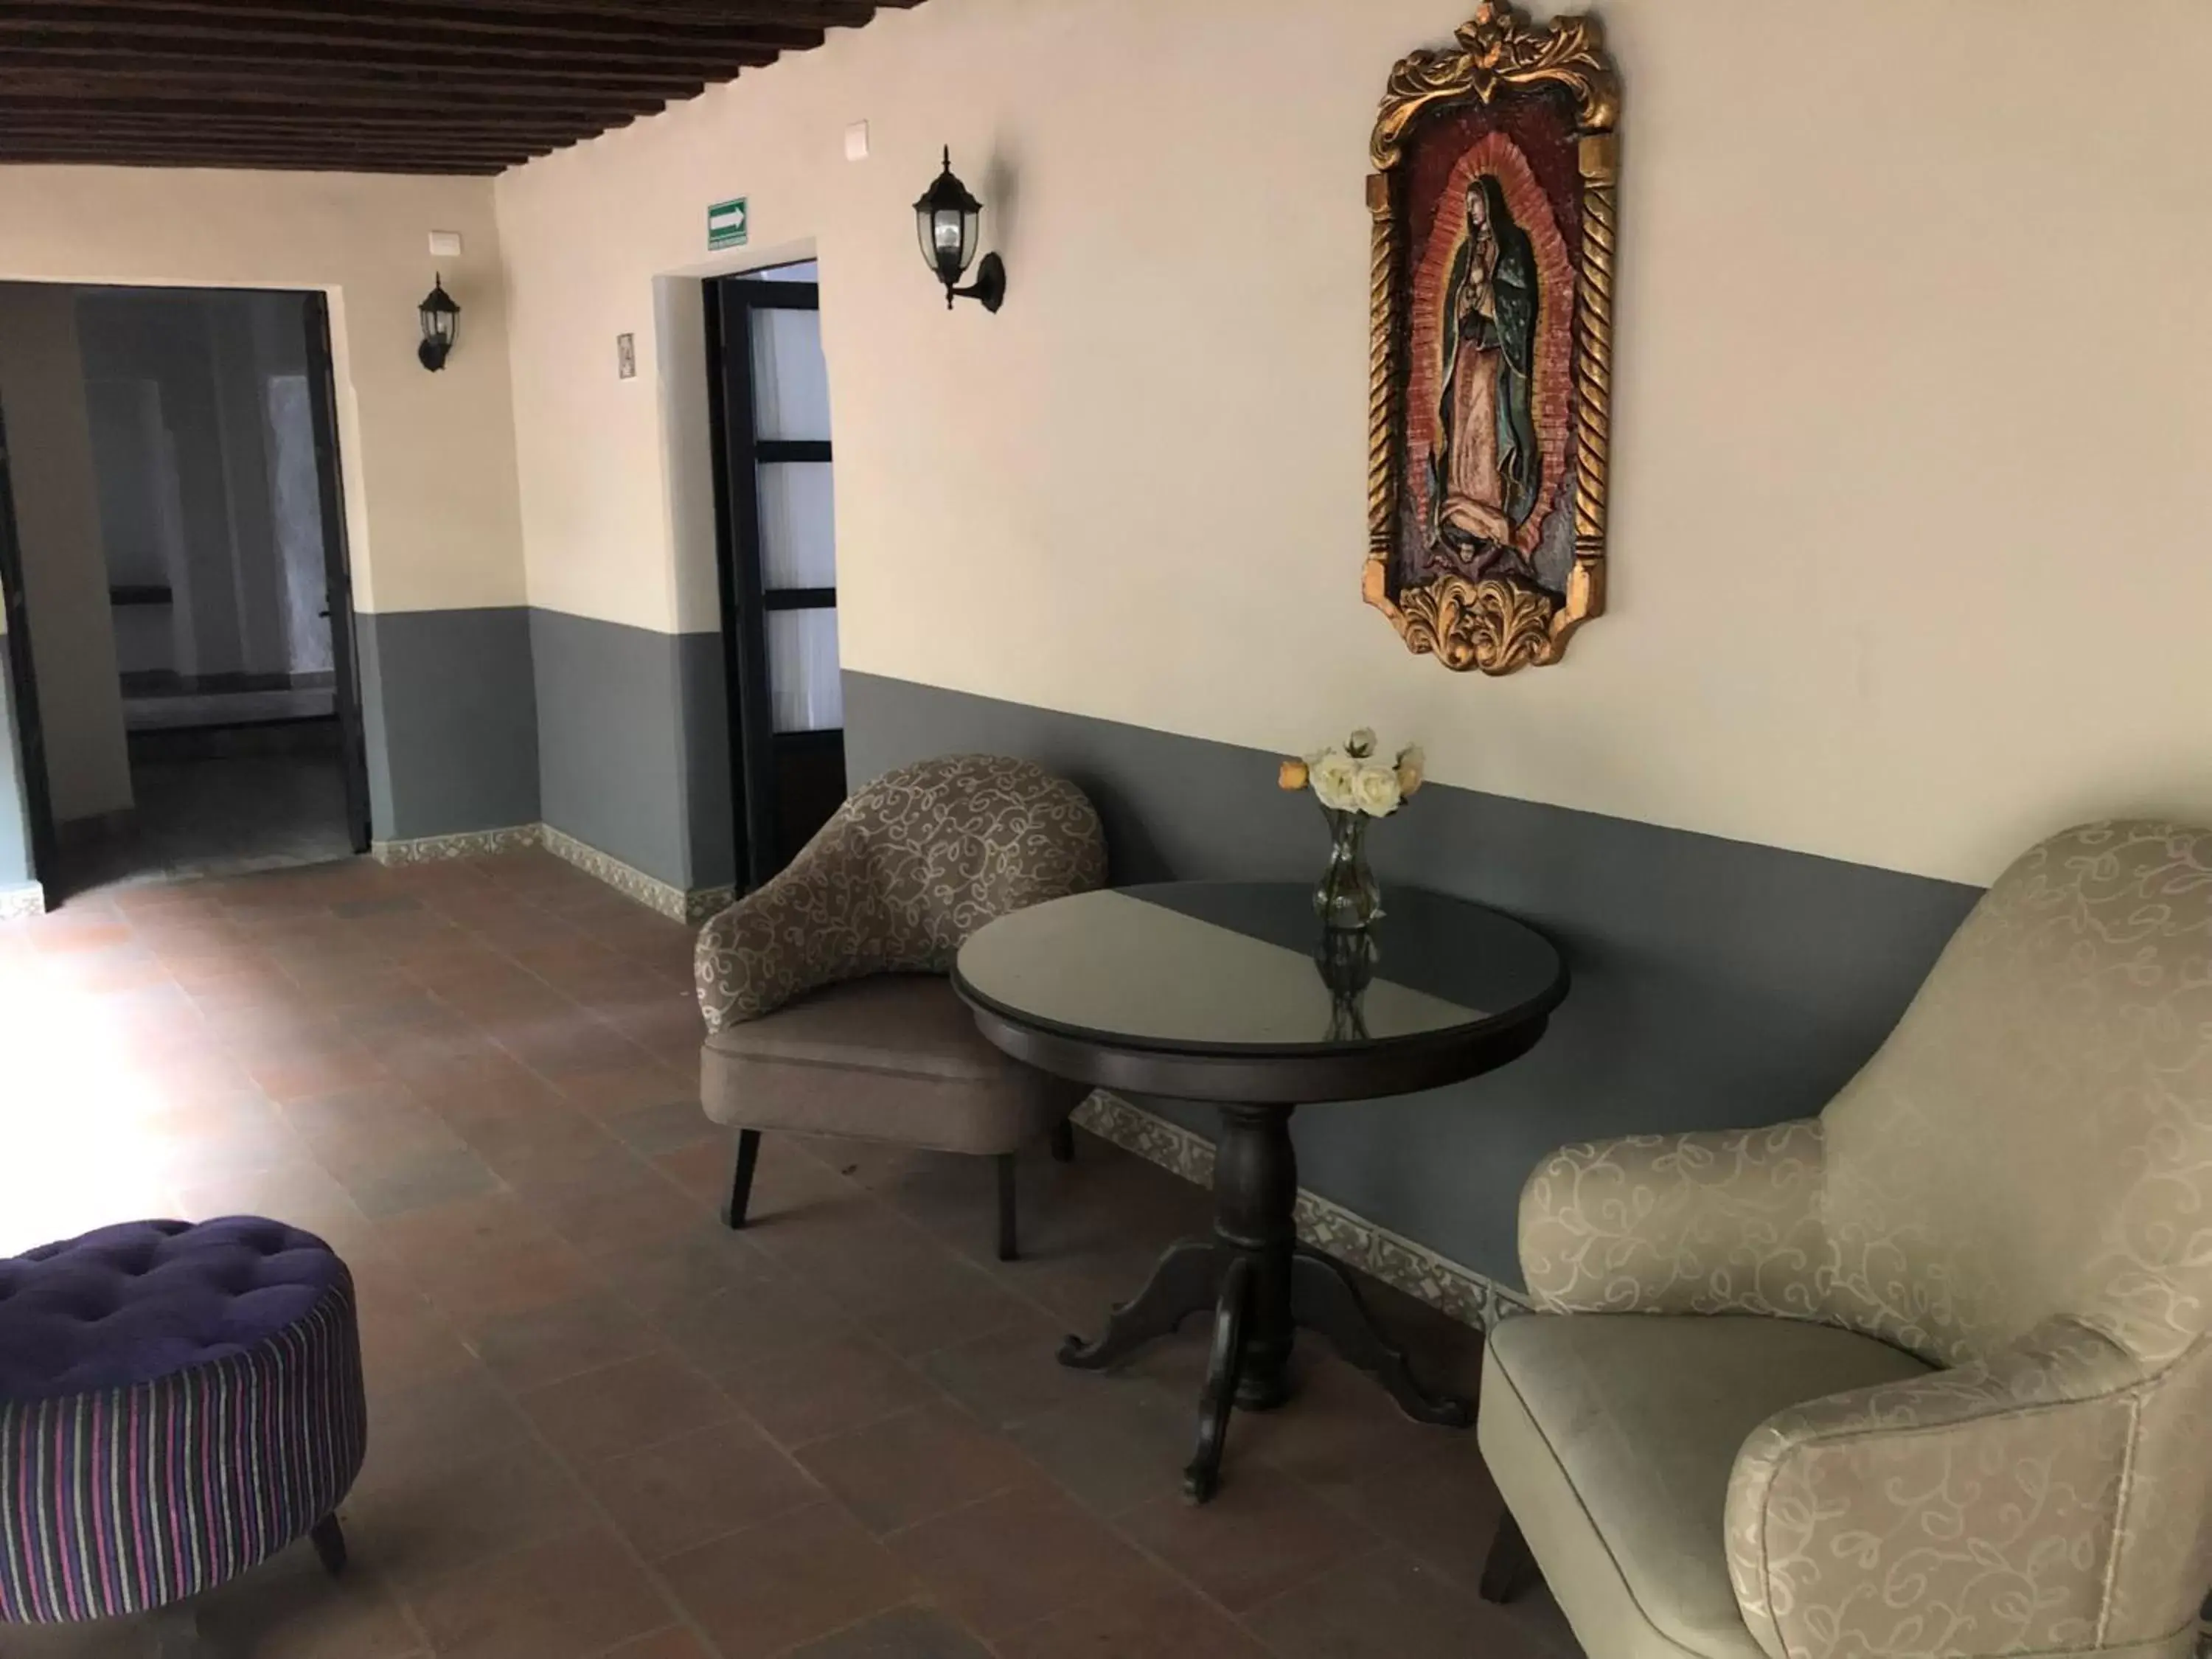 Seating Area in Hotel Frida